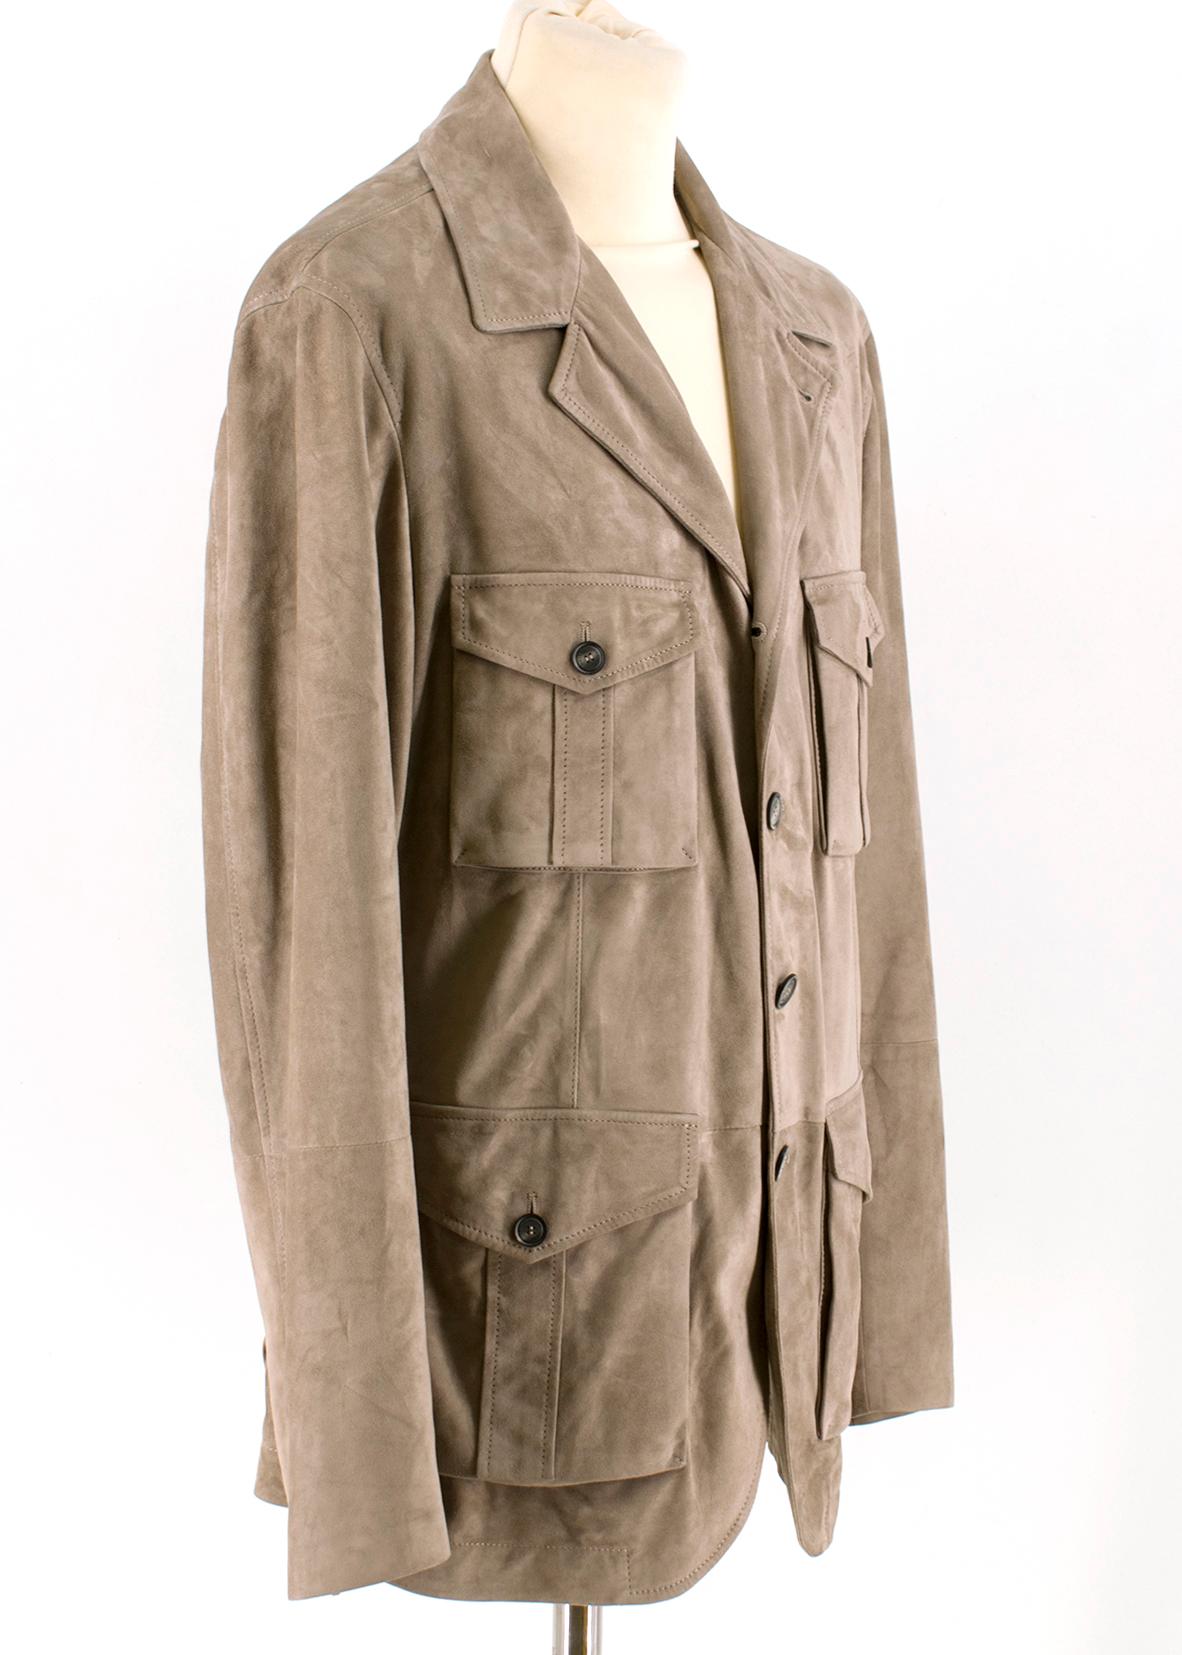 Brunello Cucinelli Men's Suede Jacket

-Tan, suede
-Button-up closure
-Four functional front pockets
-Optional back vents with push-button closure 
- Fully lined 

Please note, these items are pre-owned and may show some signs of storage, even when